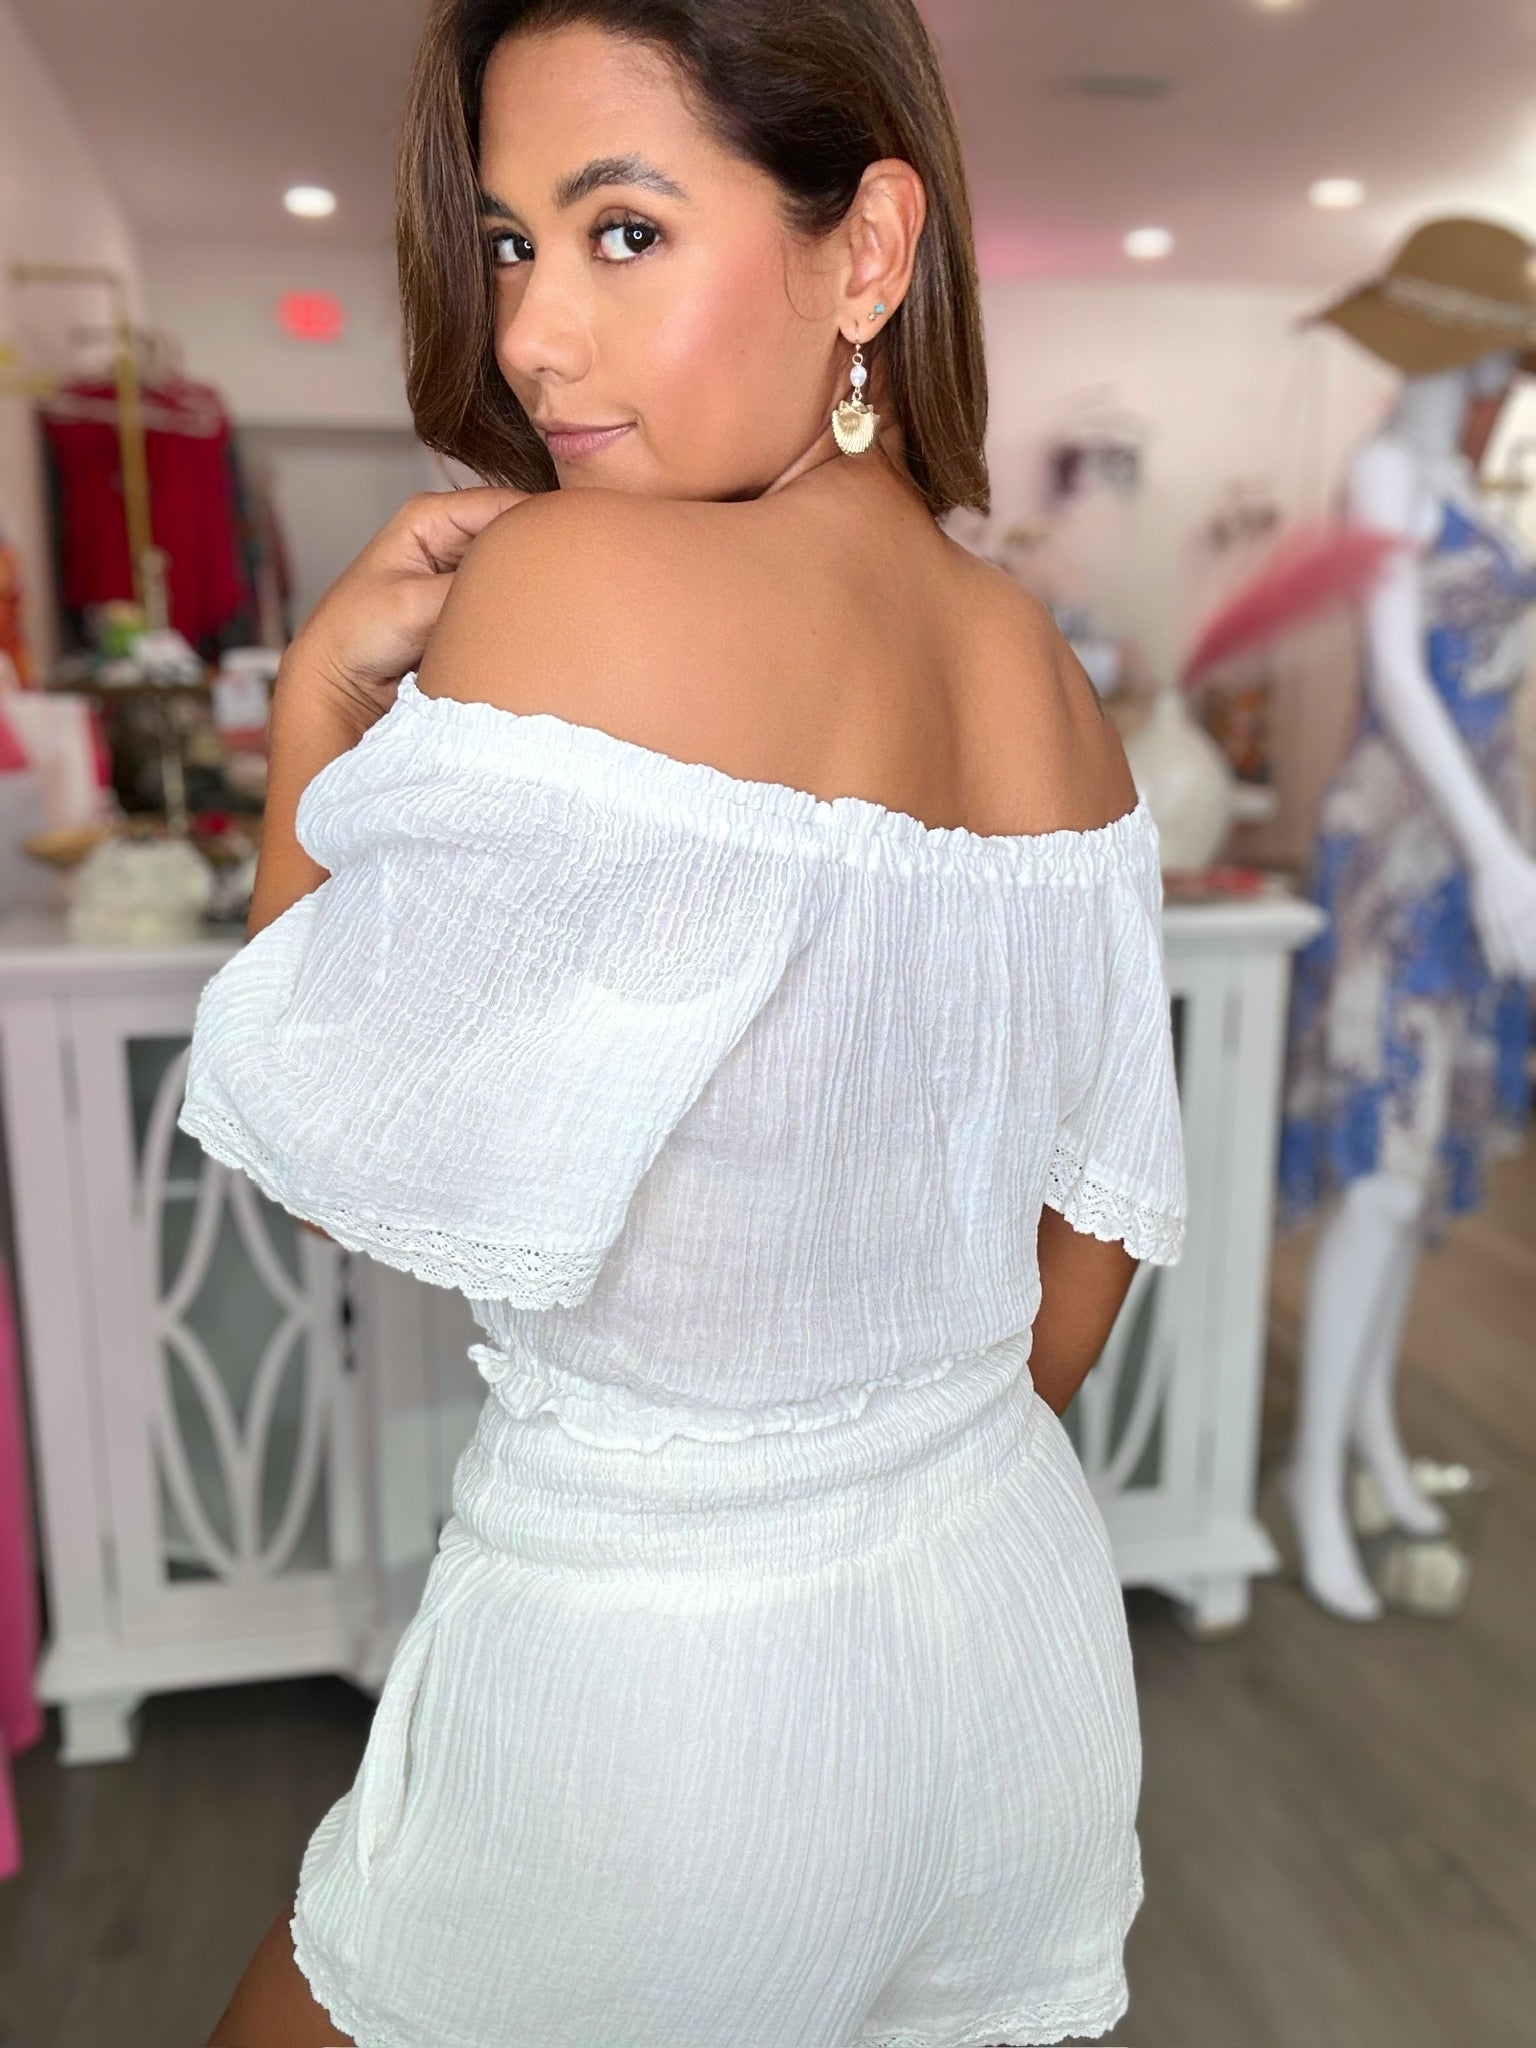 The White Angel Top